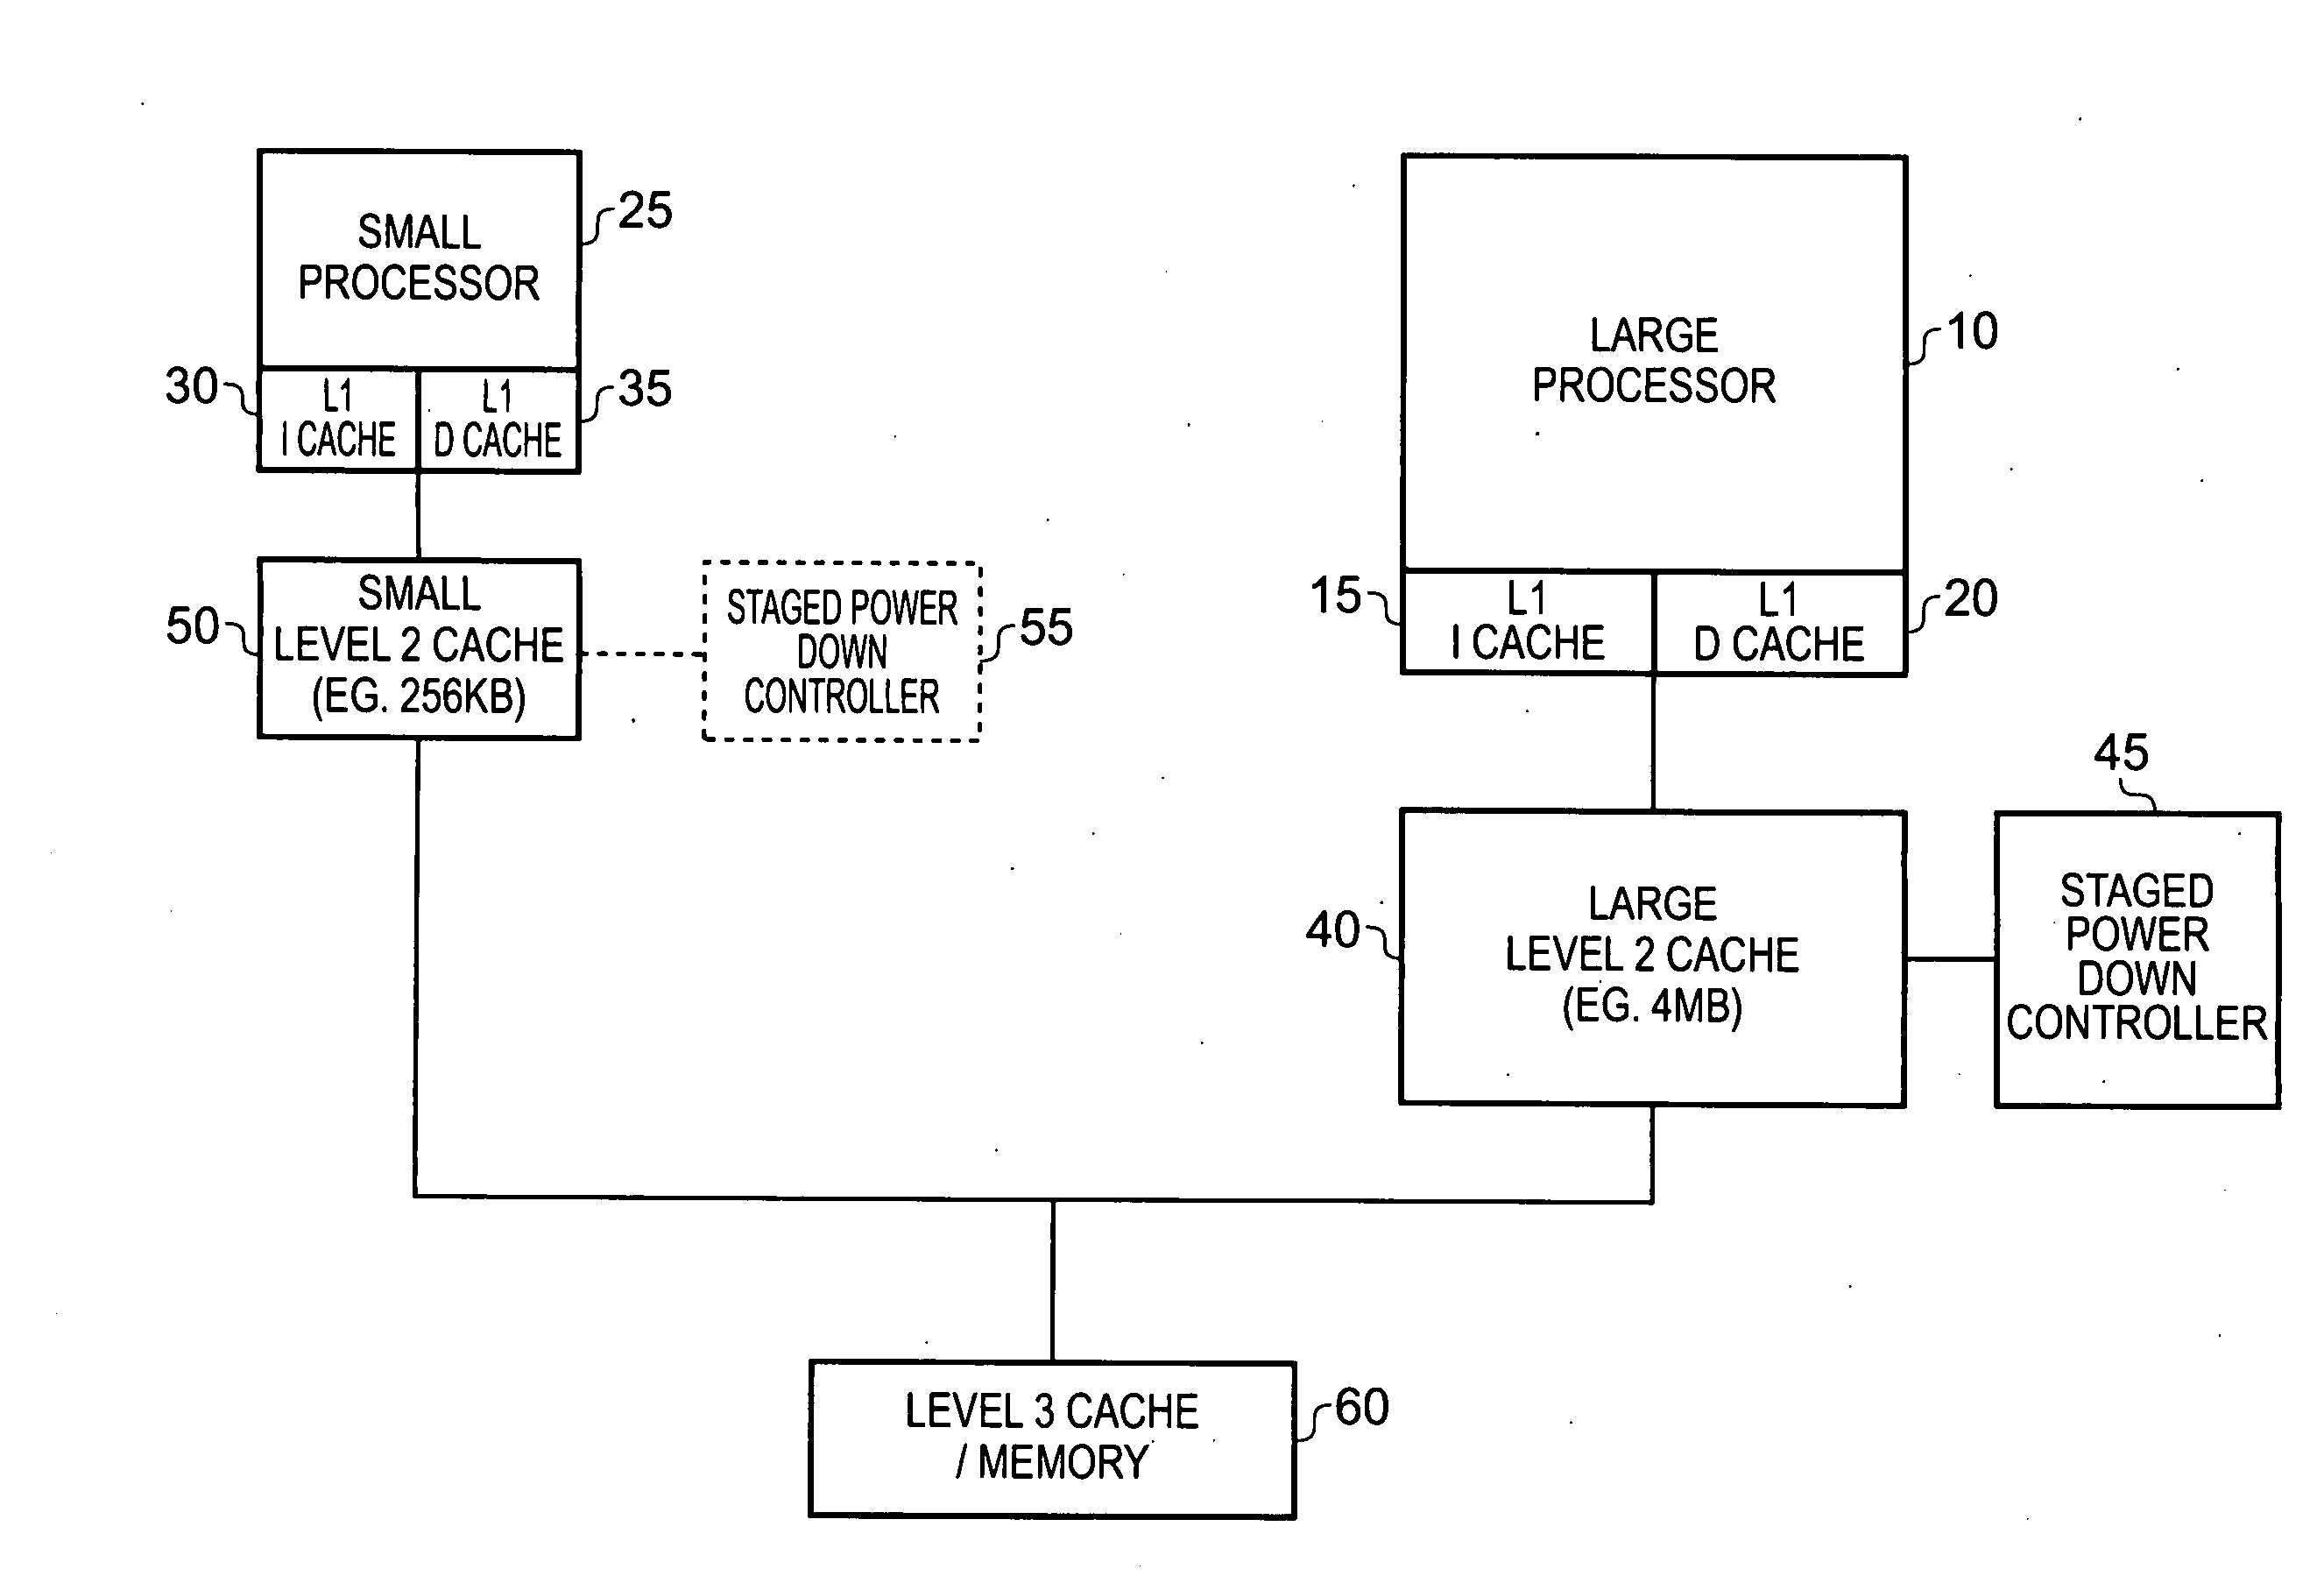 Data processing apparatus and method for powering down a cache